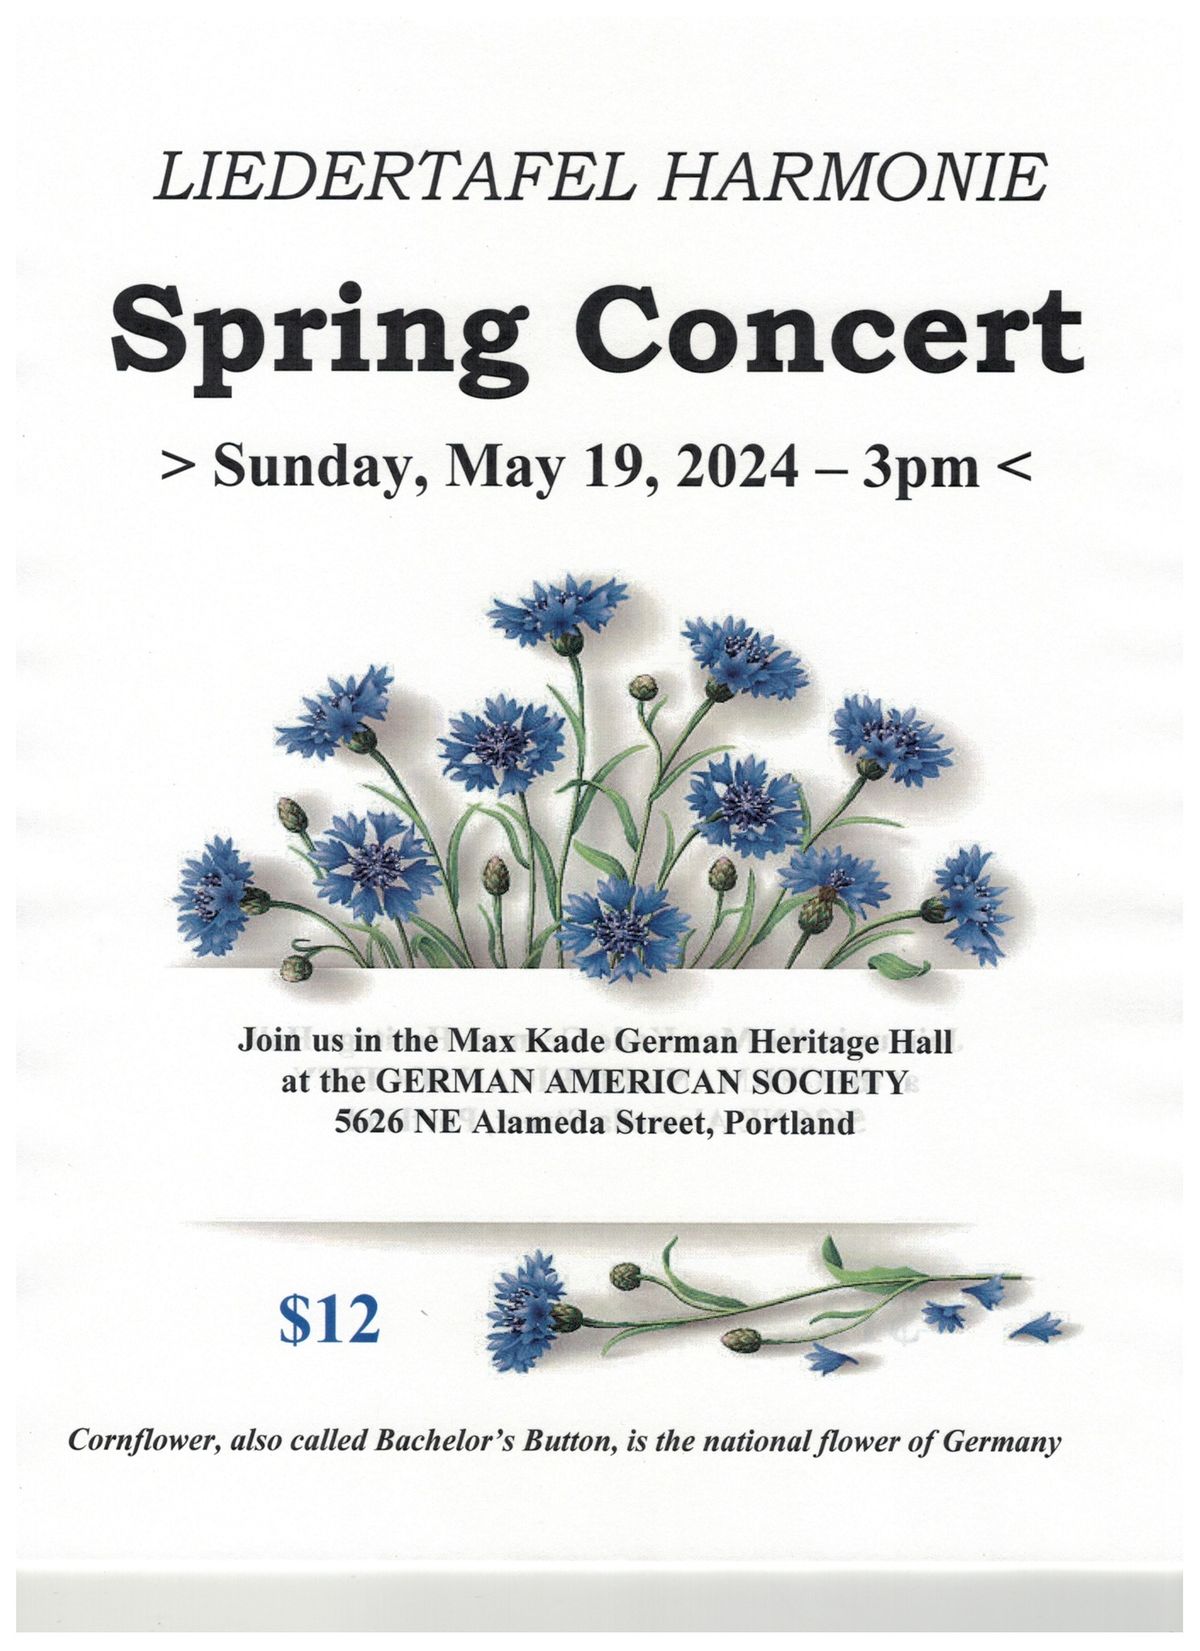 Annual Spring Concert